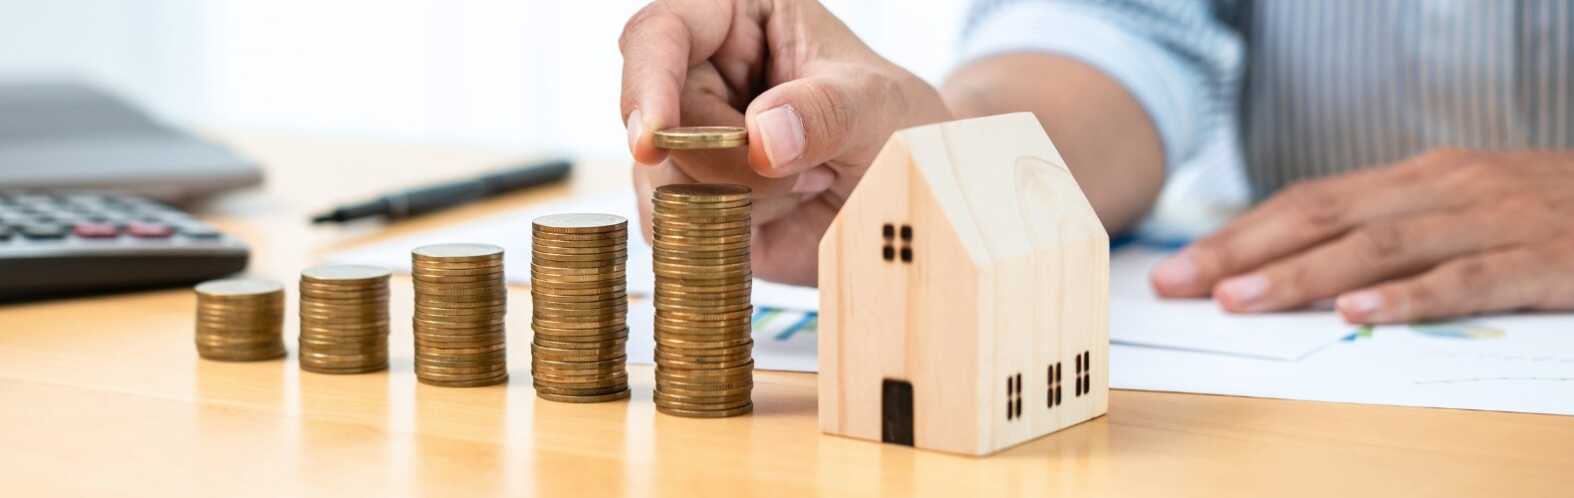 Rising Costs: Why Home Insurance Increases Every Year